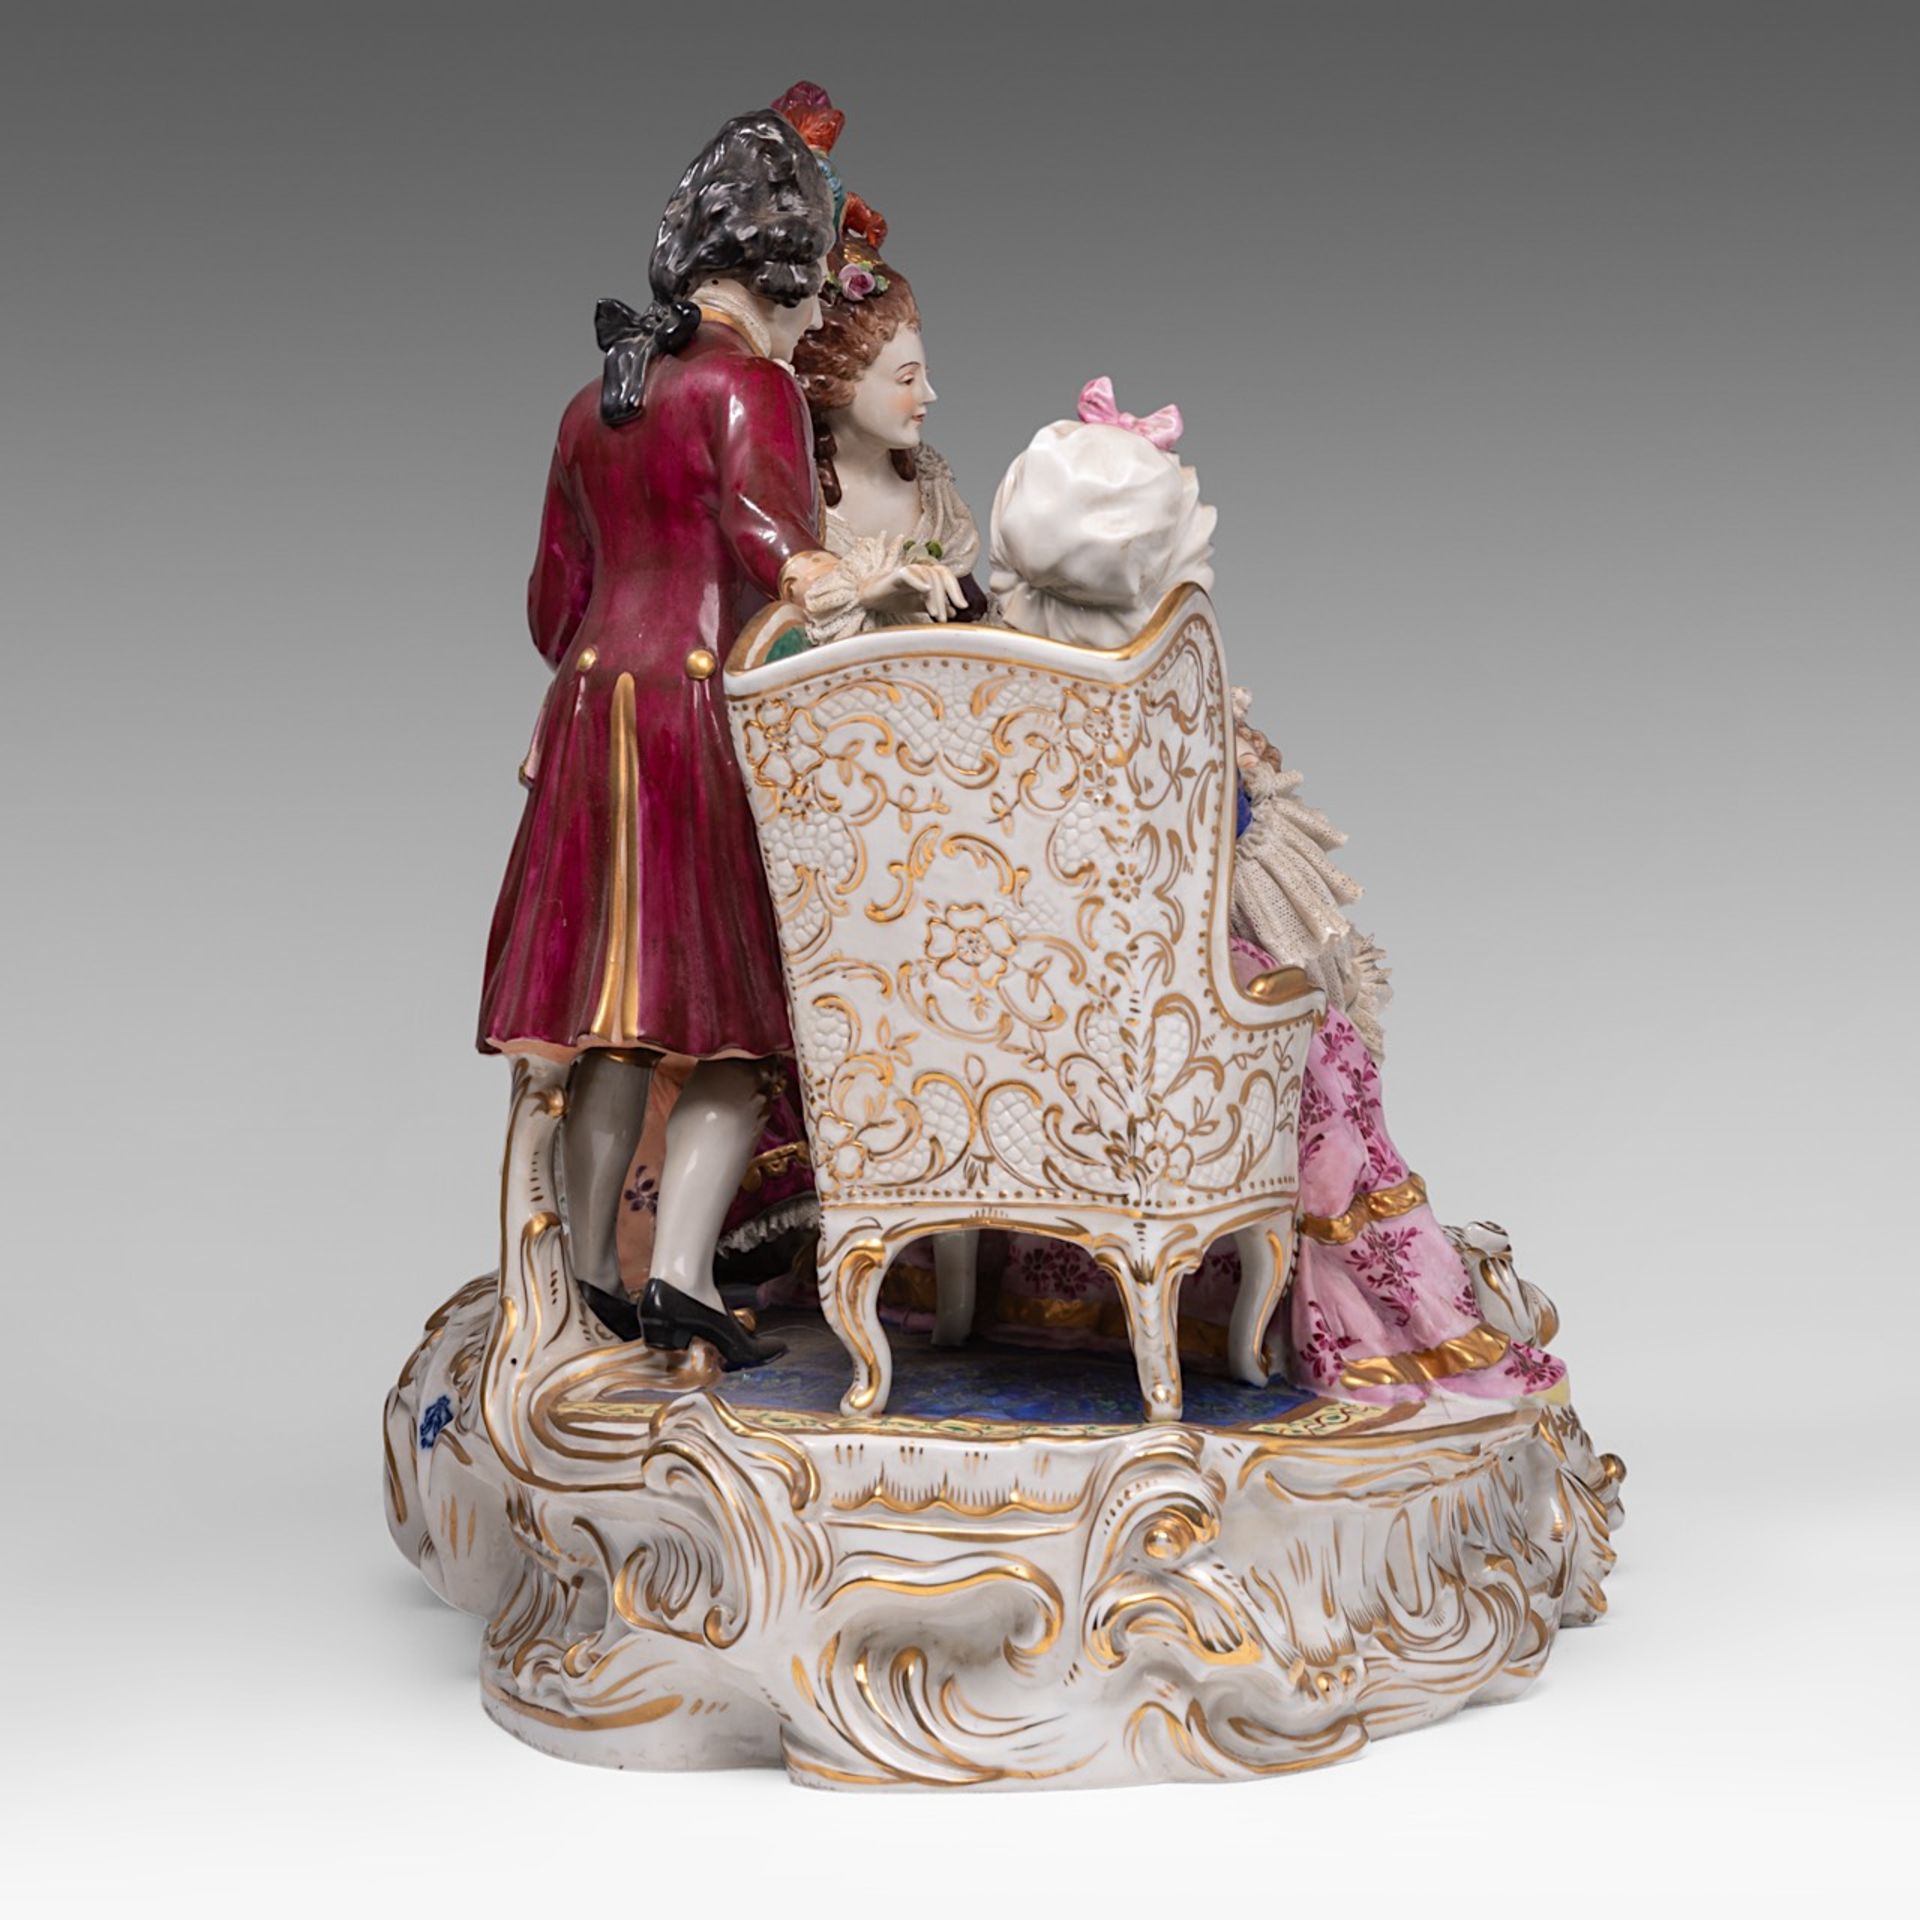 A large Saxony polychrome porcelain group depicting a gallant scene in a Rococo setting, H 40 - W 55 - Bild 6 aus 15